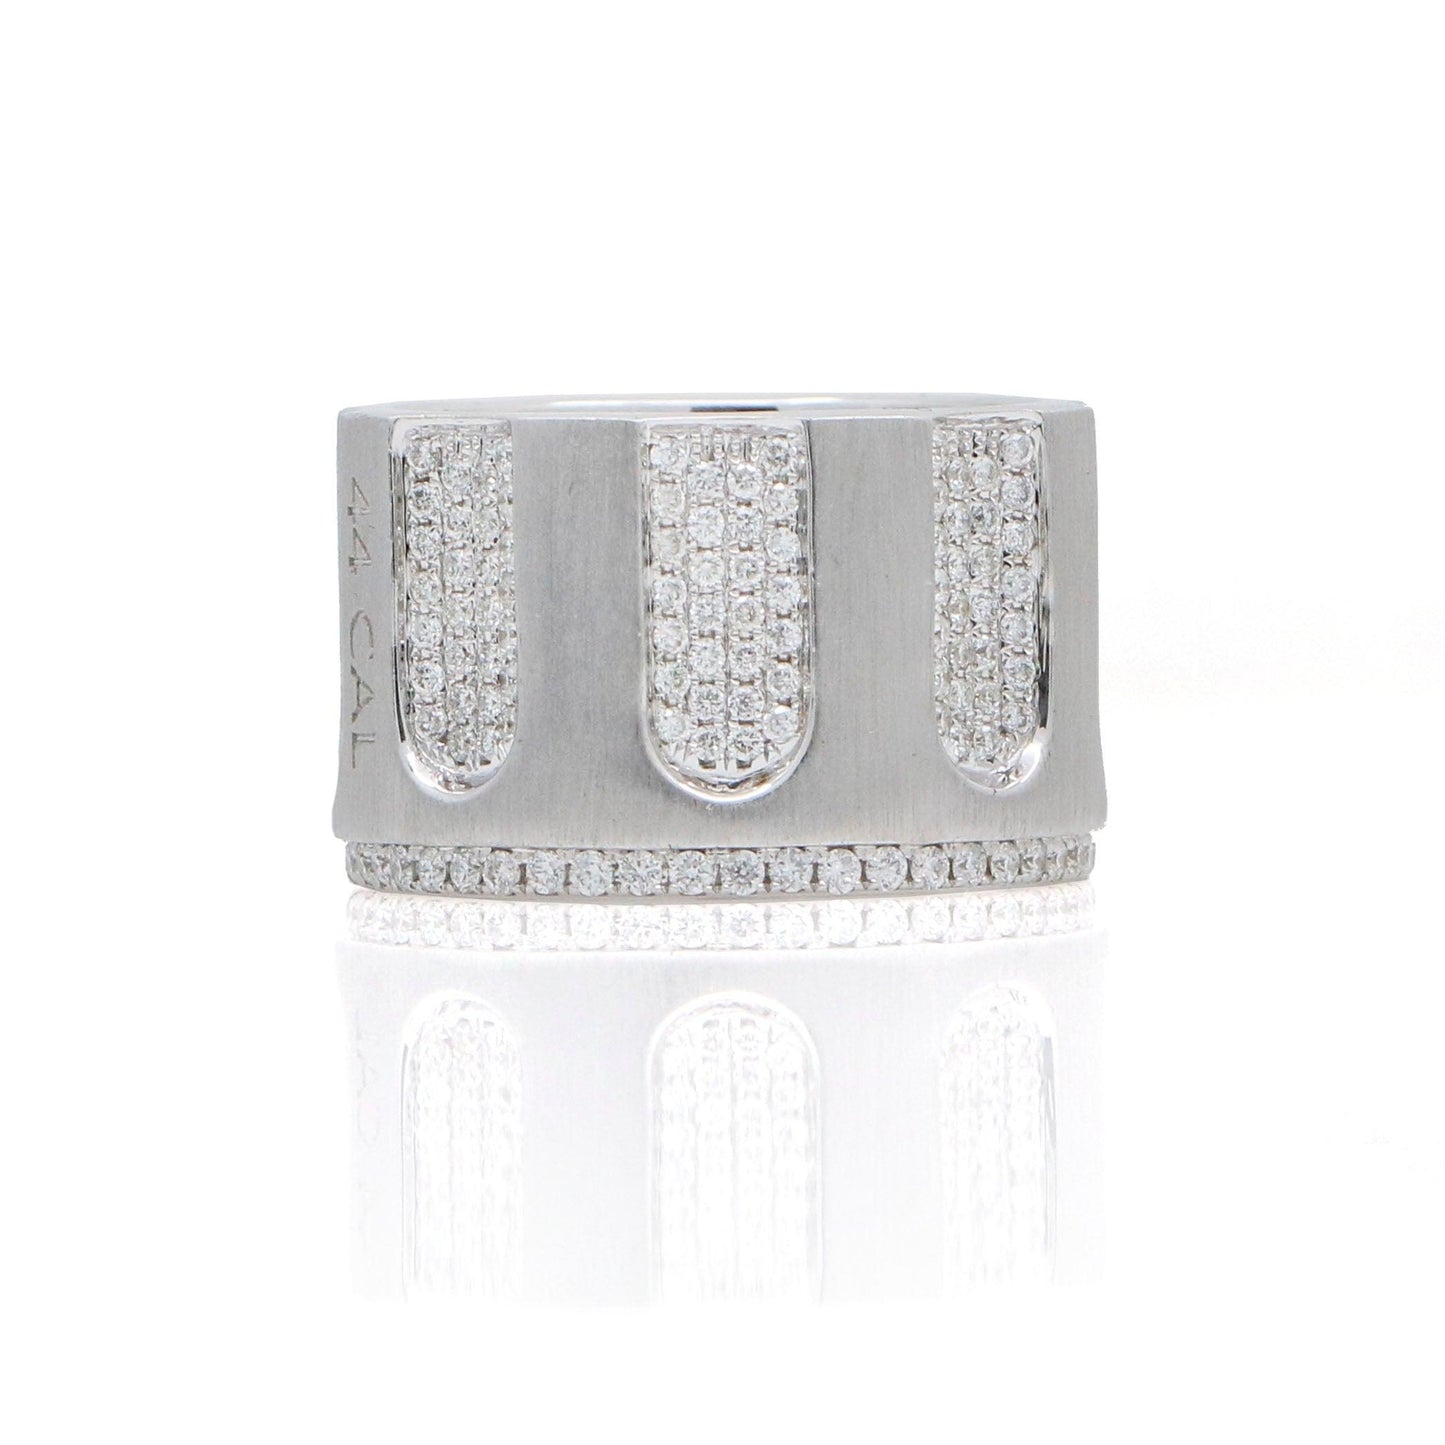 Caliber 44 Pave Diamond 14k White Gold Wide Band Ring (2.36 cttw) - 31 Jewels Inc.